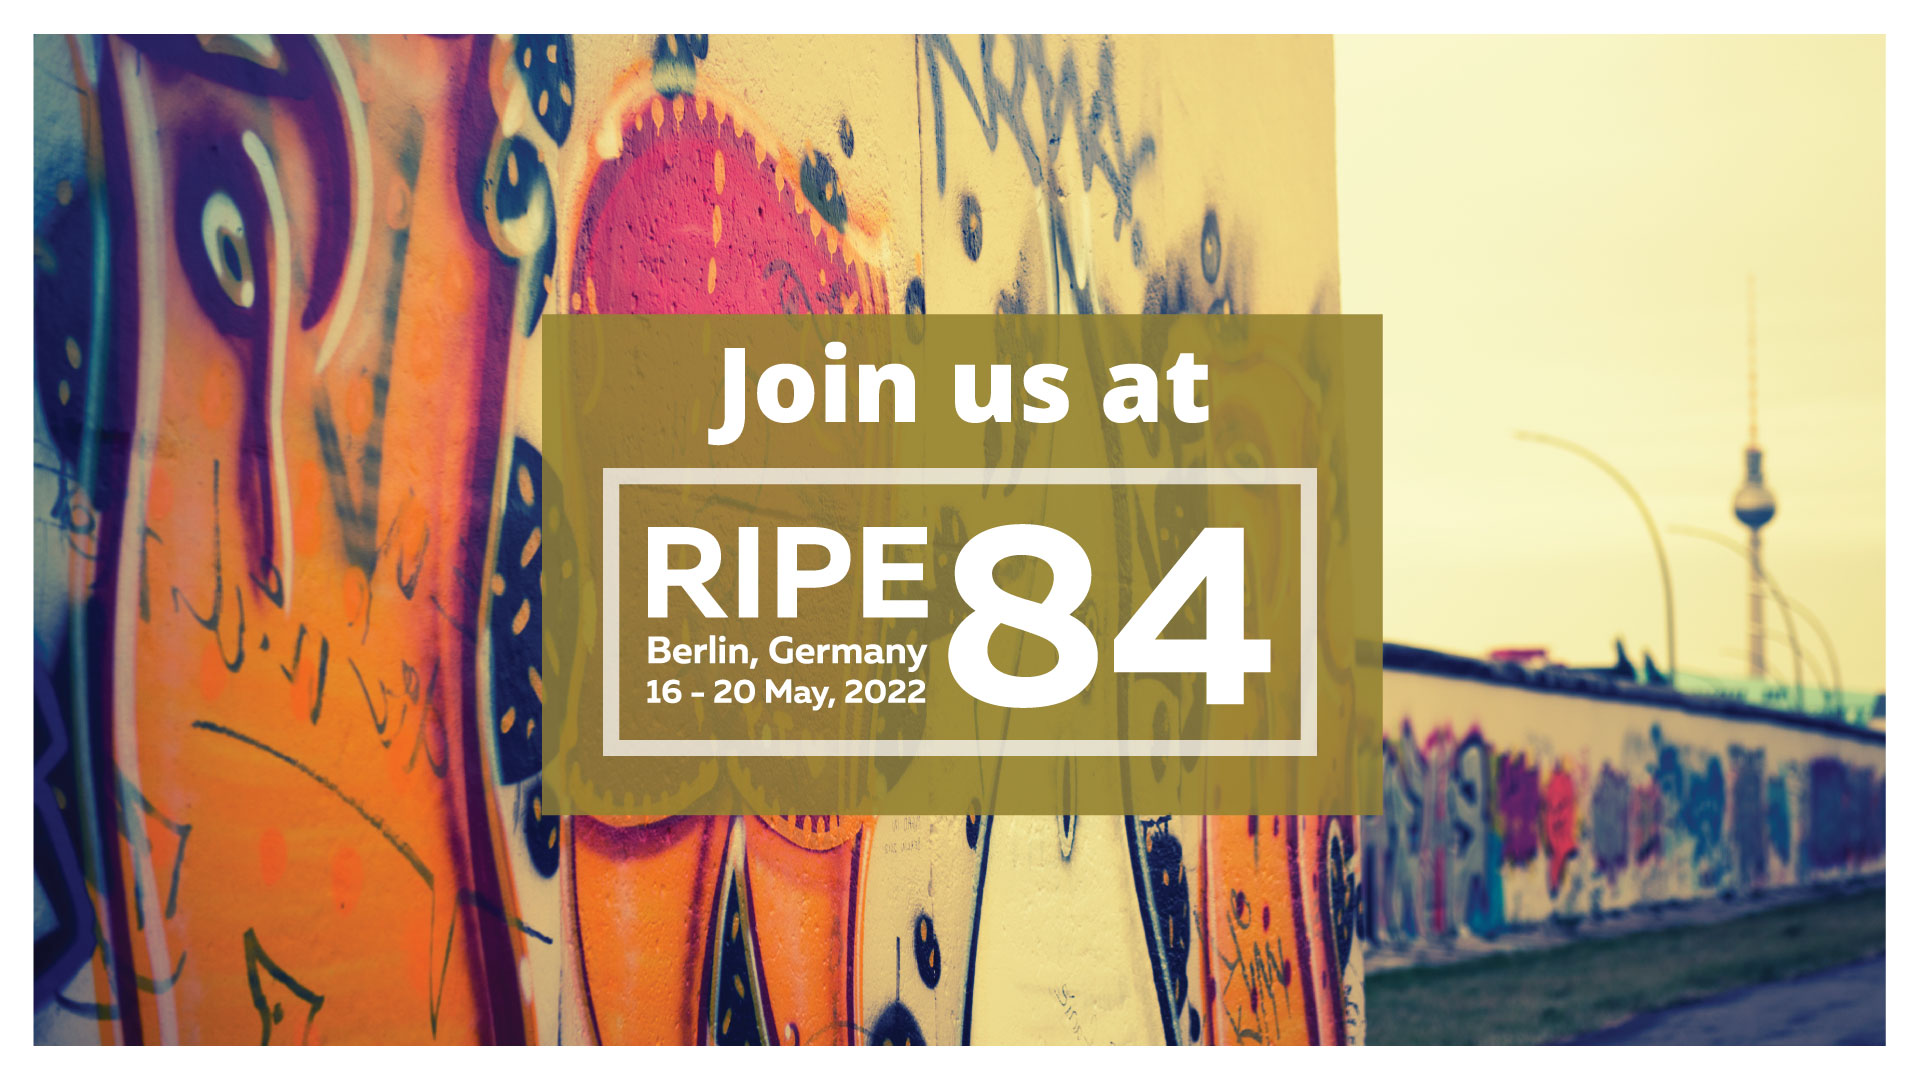 Join us at RIPE 84